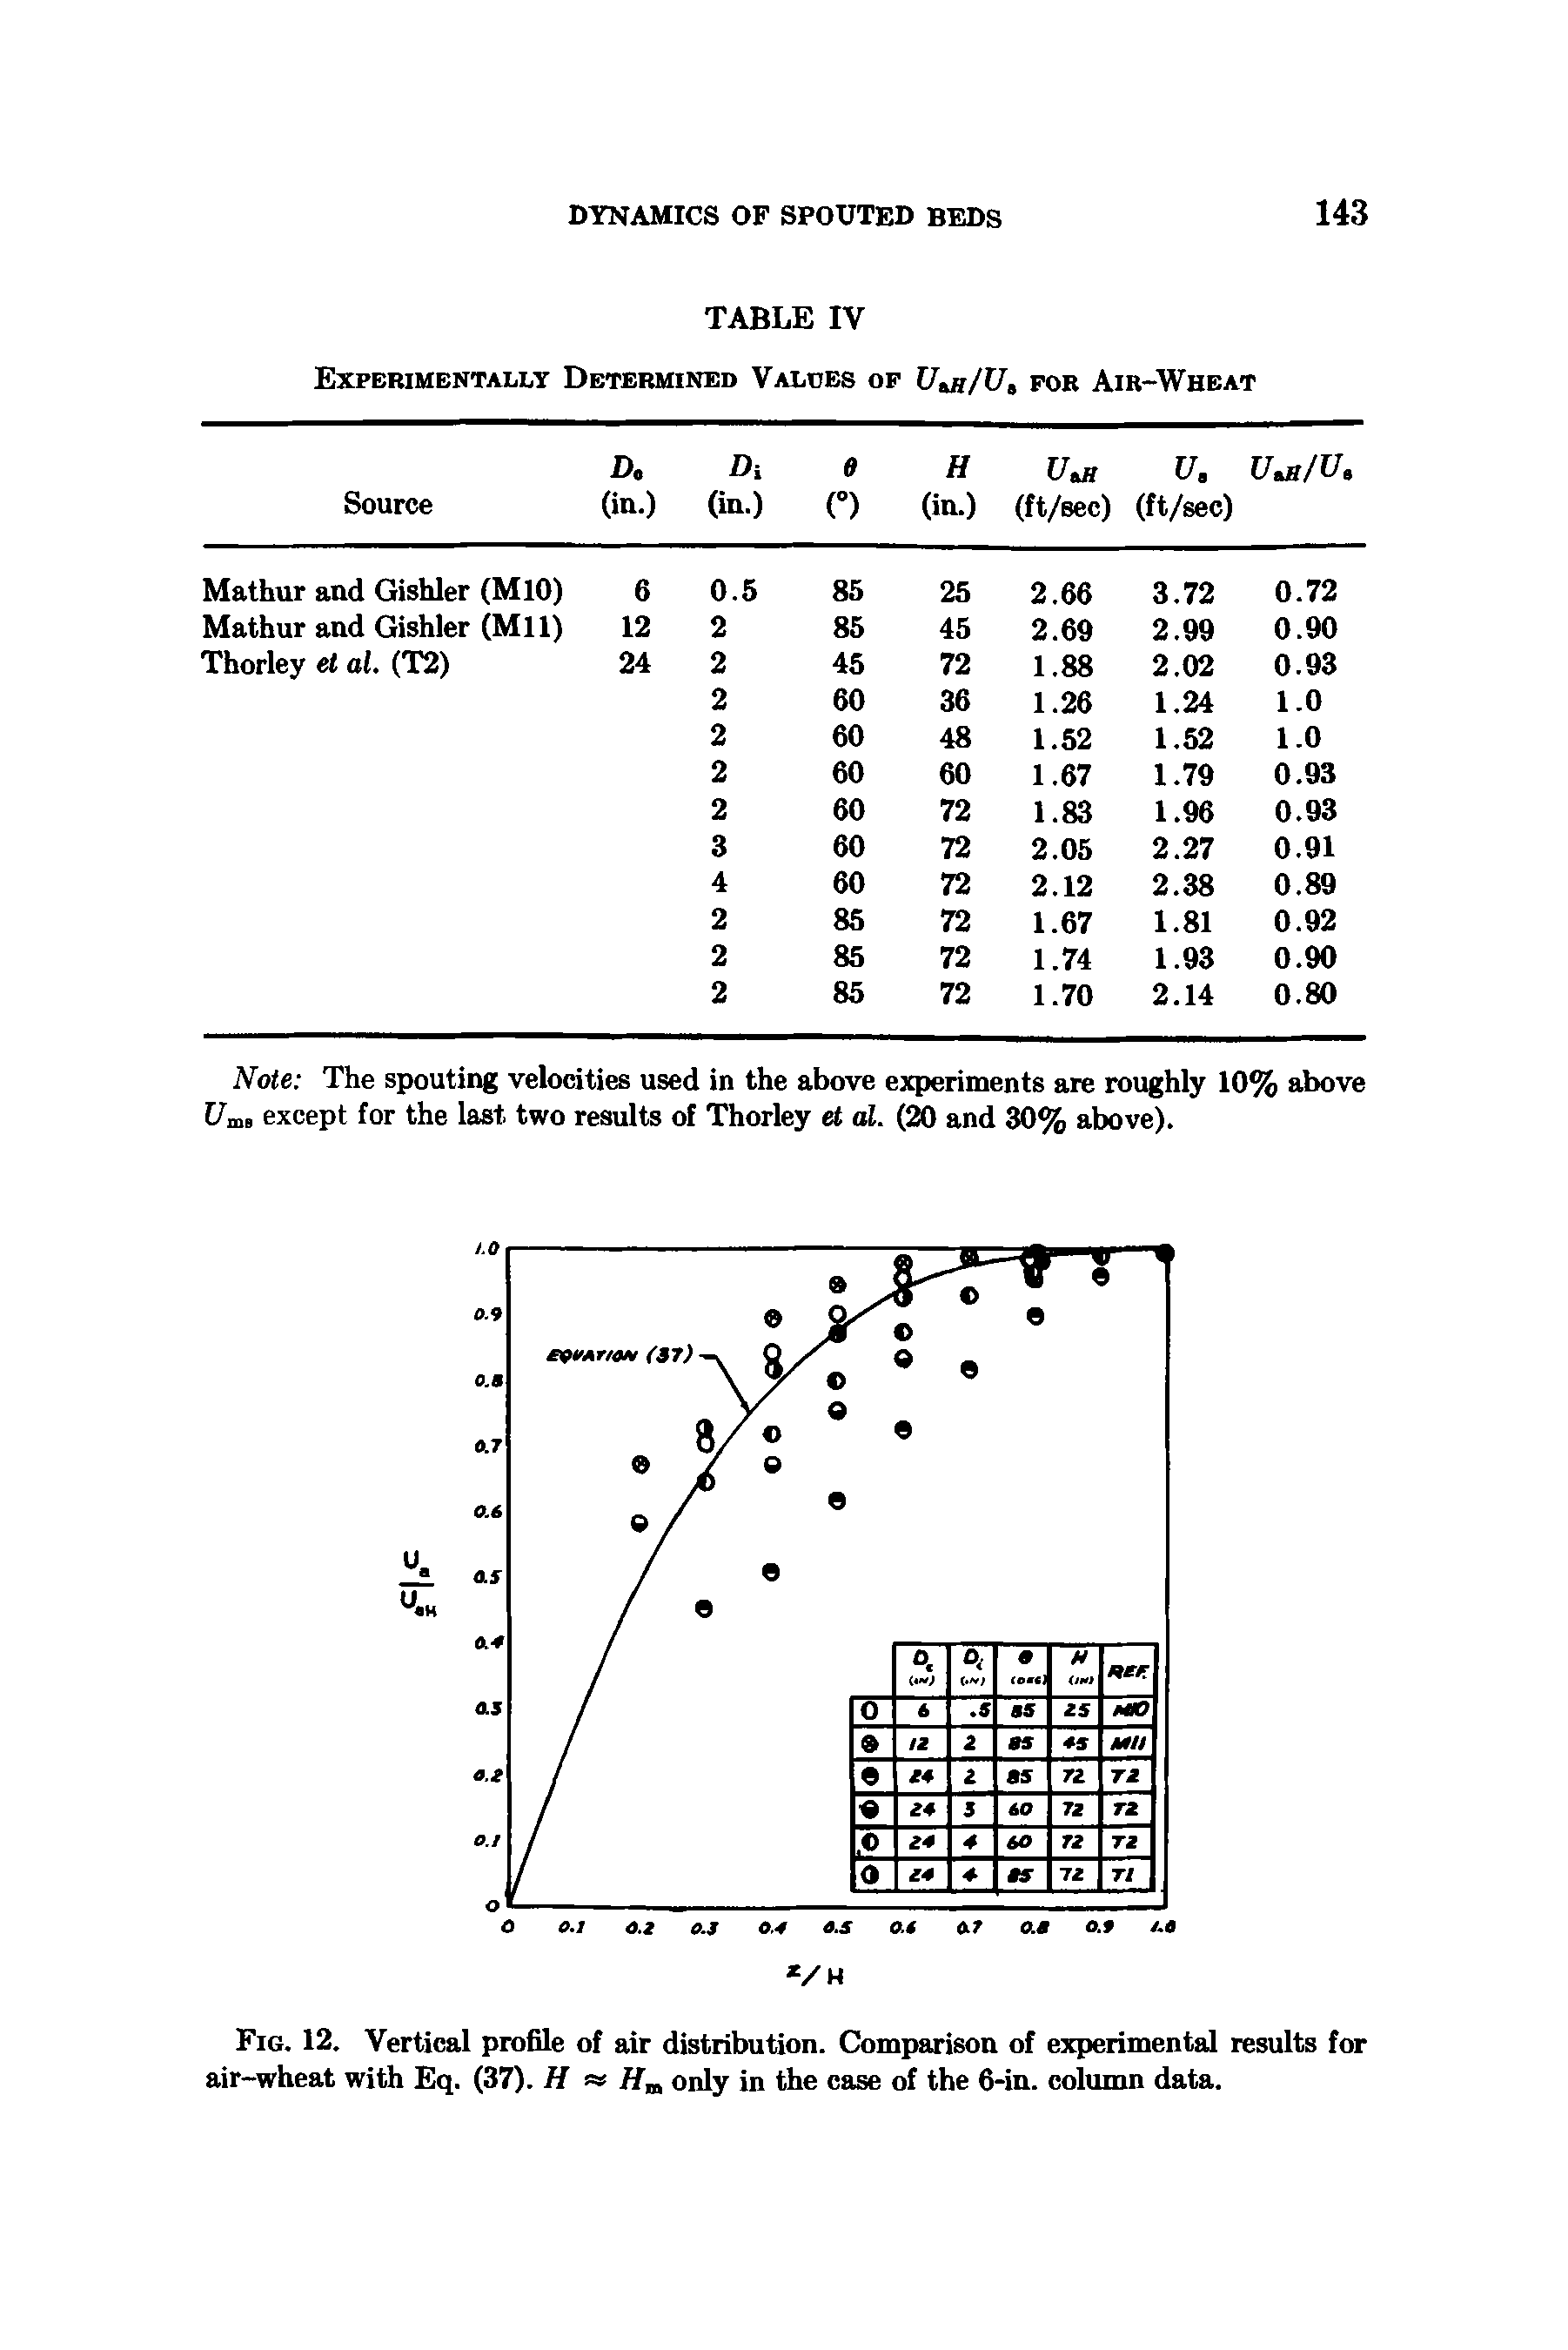 Fig. 12. Vertical profile of air distribution. Comparison of experimental results for air-wheat with Eq. (37). H only in the case of the 6-in. column data.